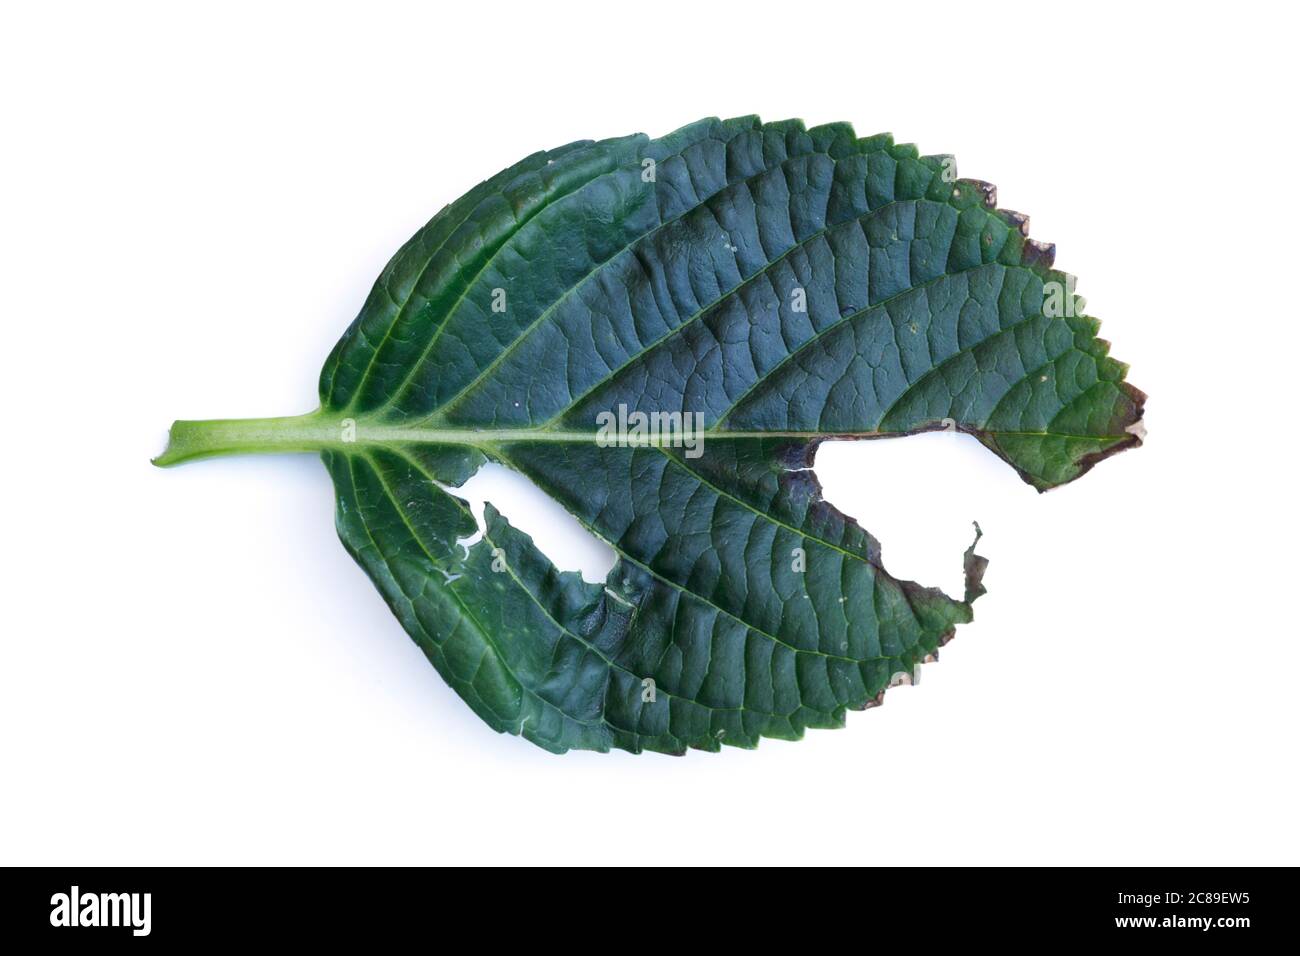 Hydrangea Leaf With Holes Eaten By Caterpillar Or Other Pests On White Background. Stock Photo